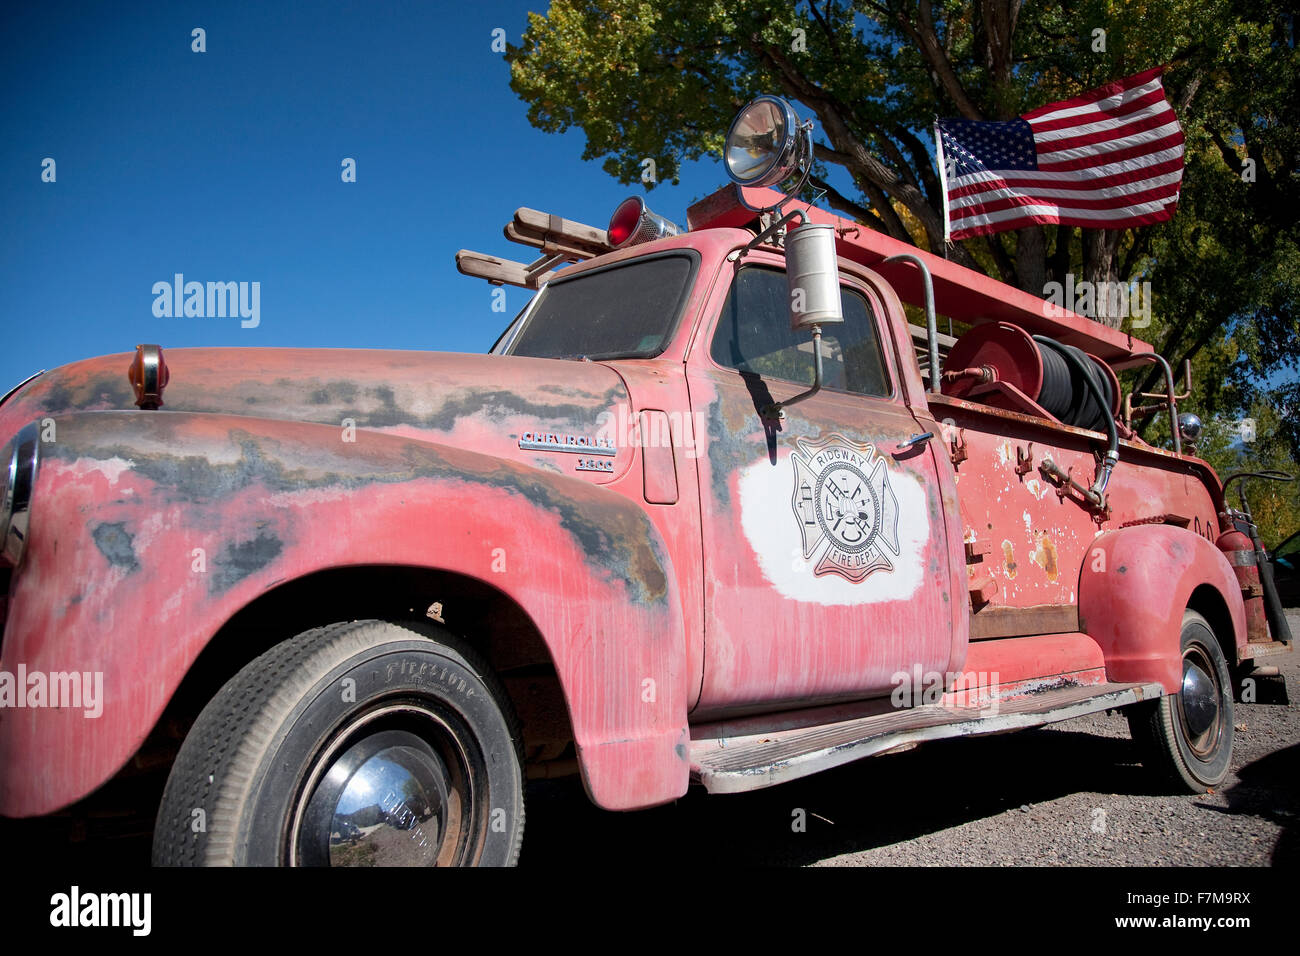 Red antique firetruck with American flag in Ridgeway Colorado Stock Photo